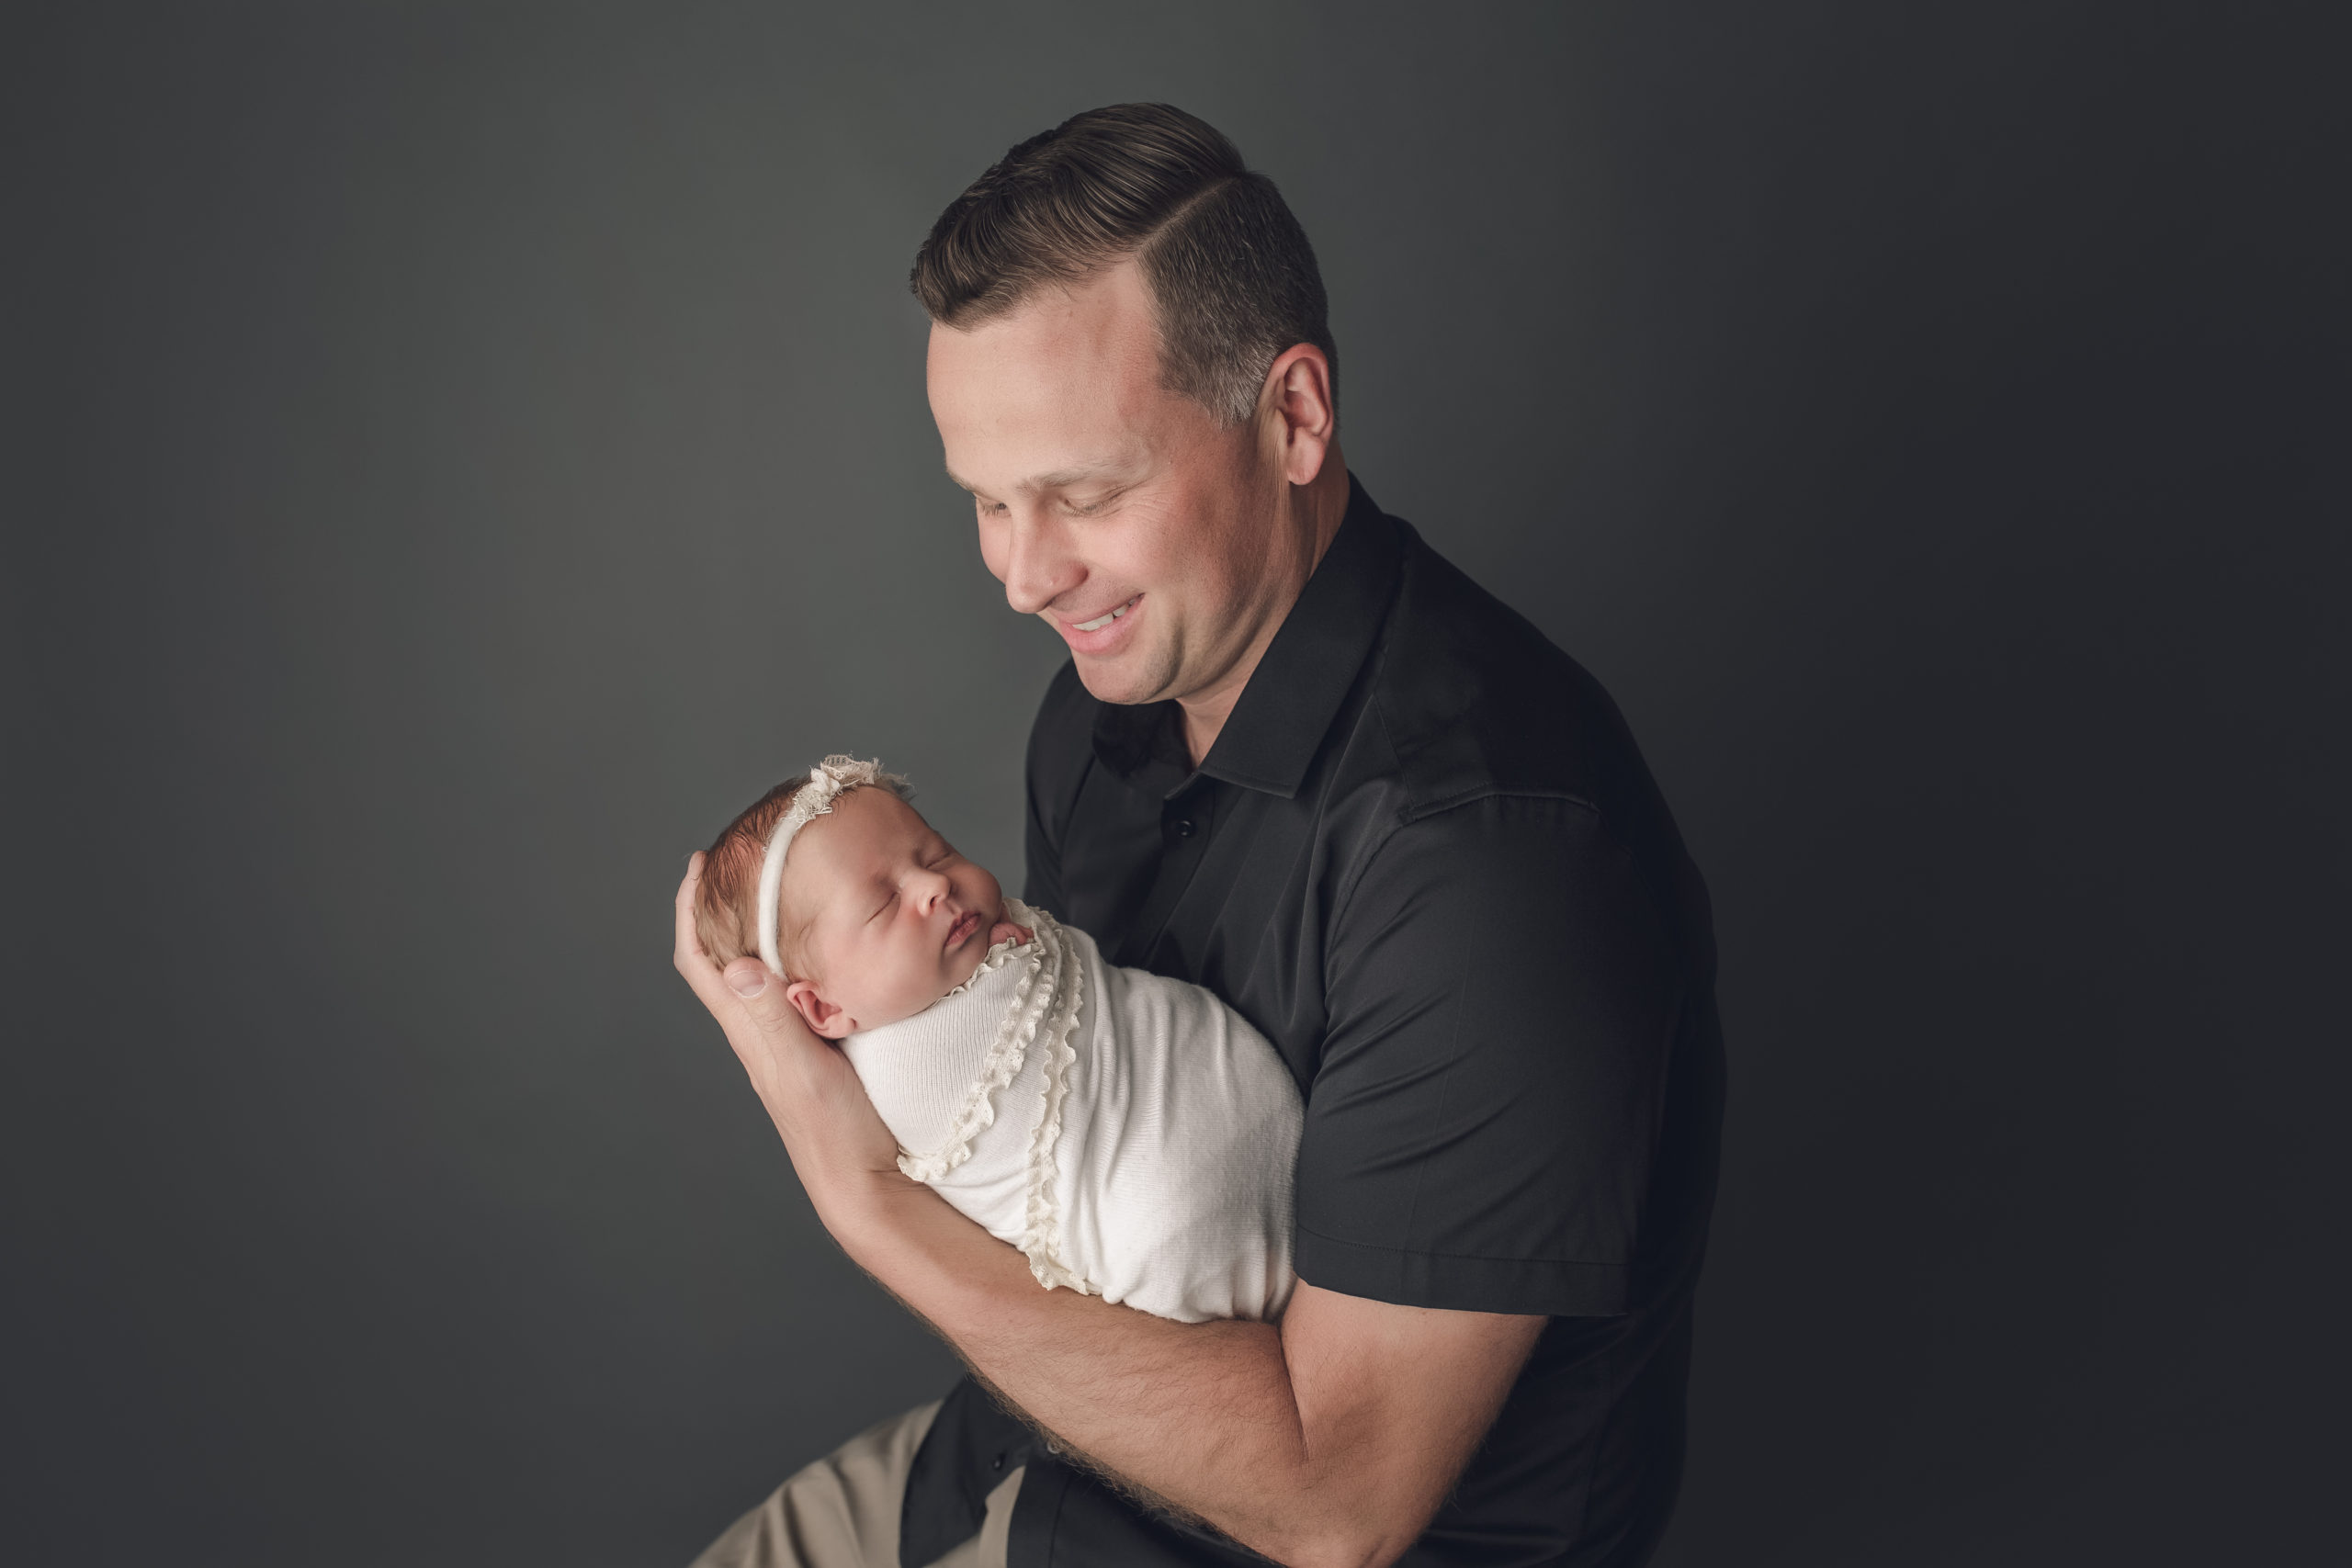 father's day, father's day 2021, special blog post father's day, Beka Price Photography